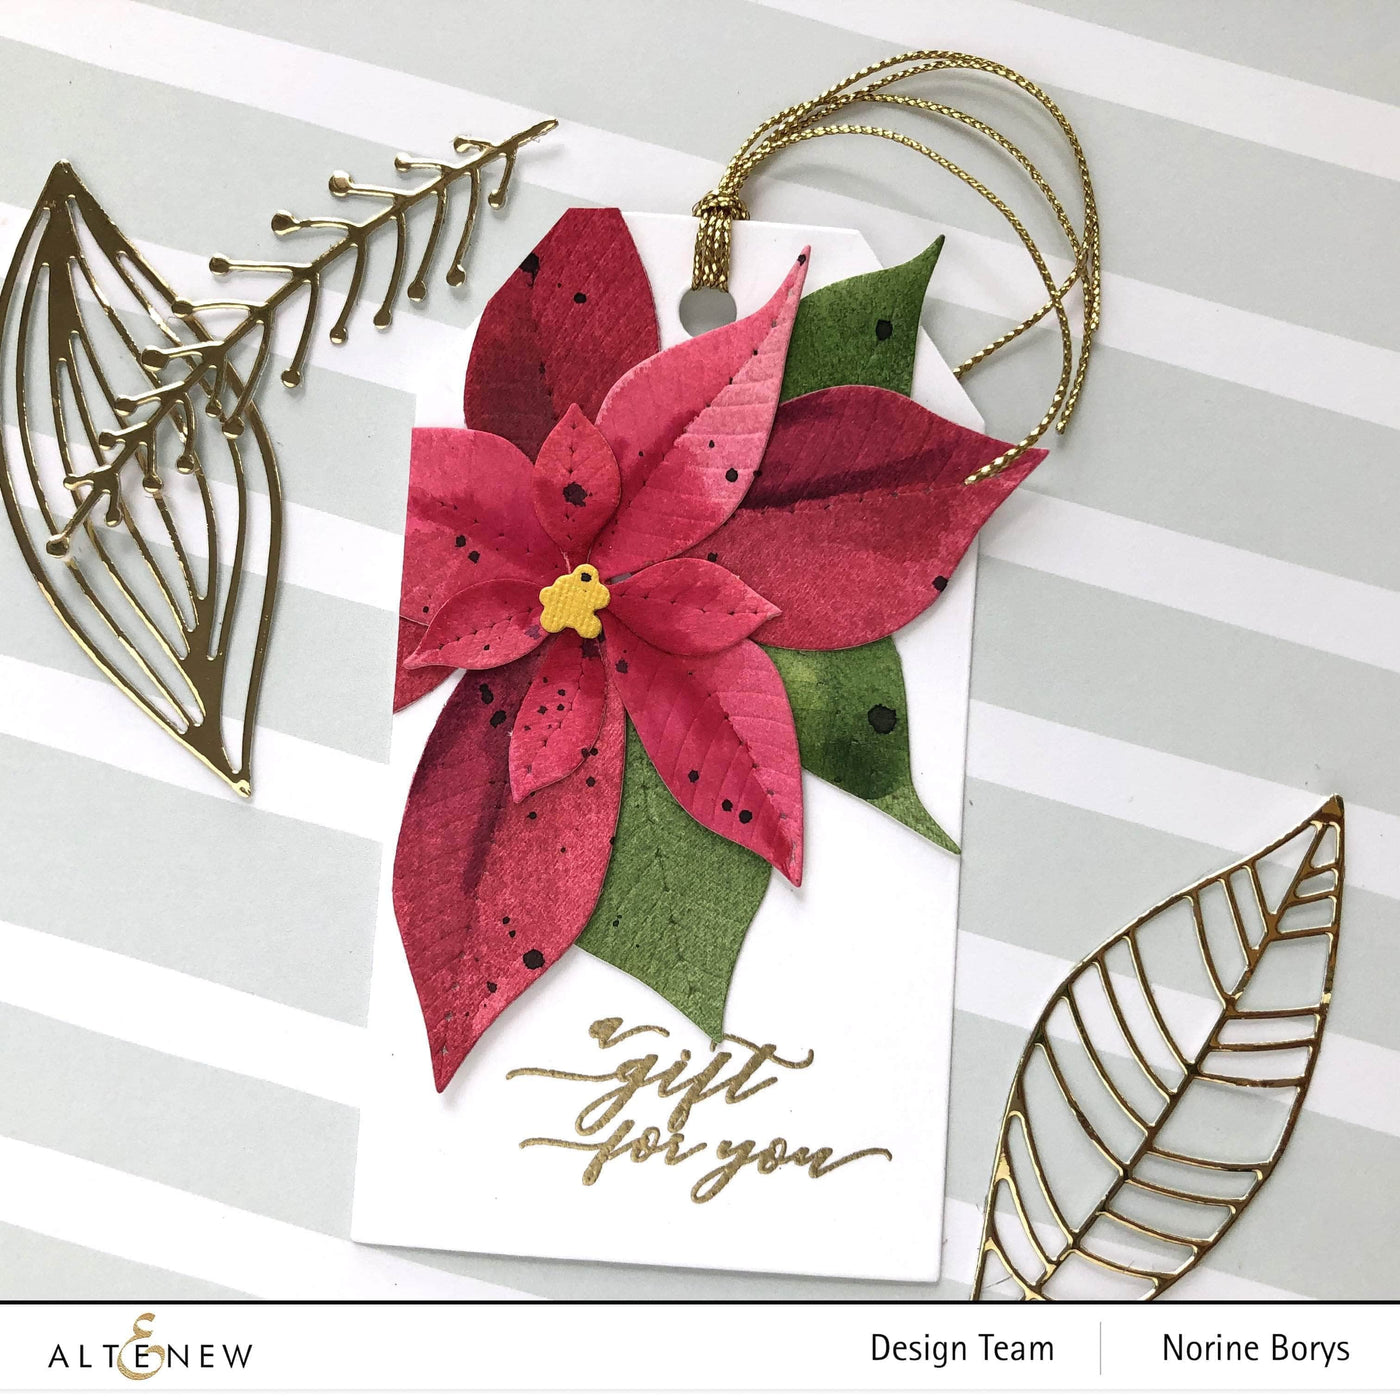 PMA Industries, Inc. Clear Stamps Holiday Tag Sentiments Stamp Set